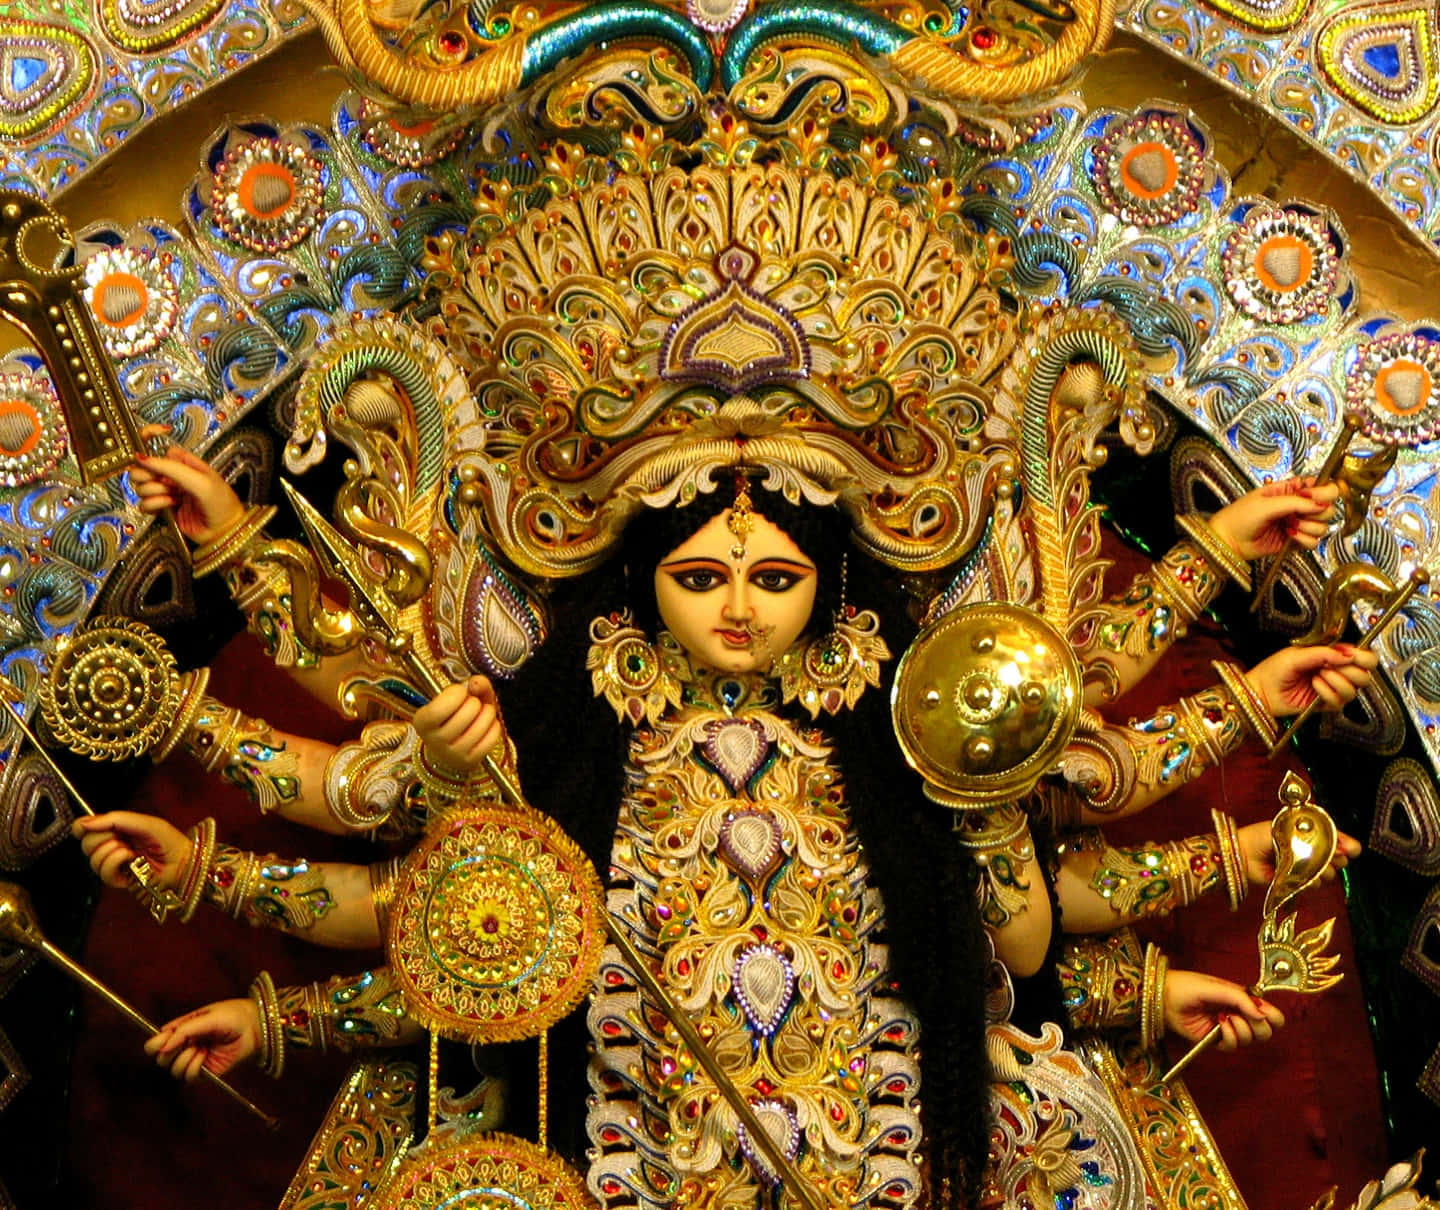 Free Durga Maa Pictures , [100+] Durga Maa Pictures for FREE | Wallpapers .com